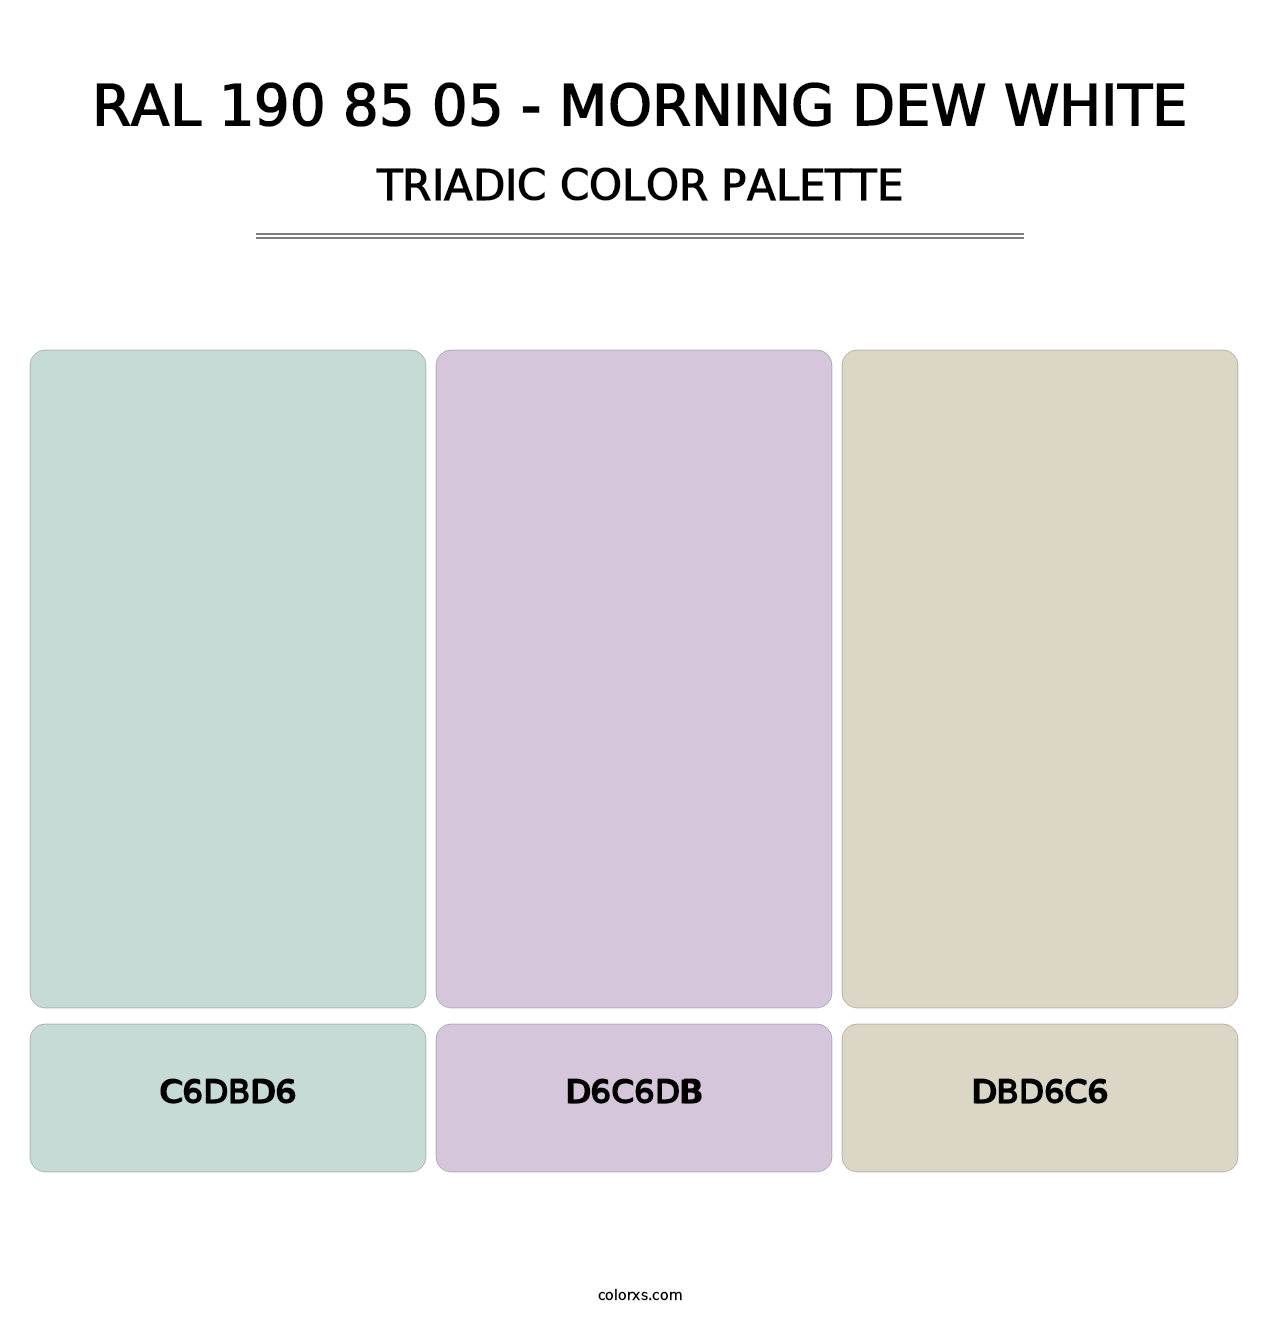 RAL 190 85 05 - Morning Dew White - Triadic Color Palette